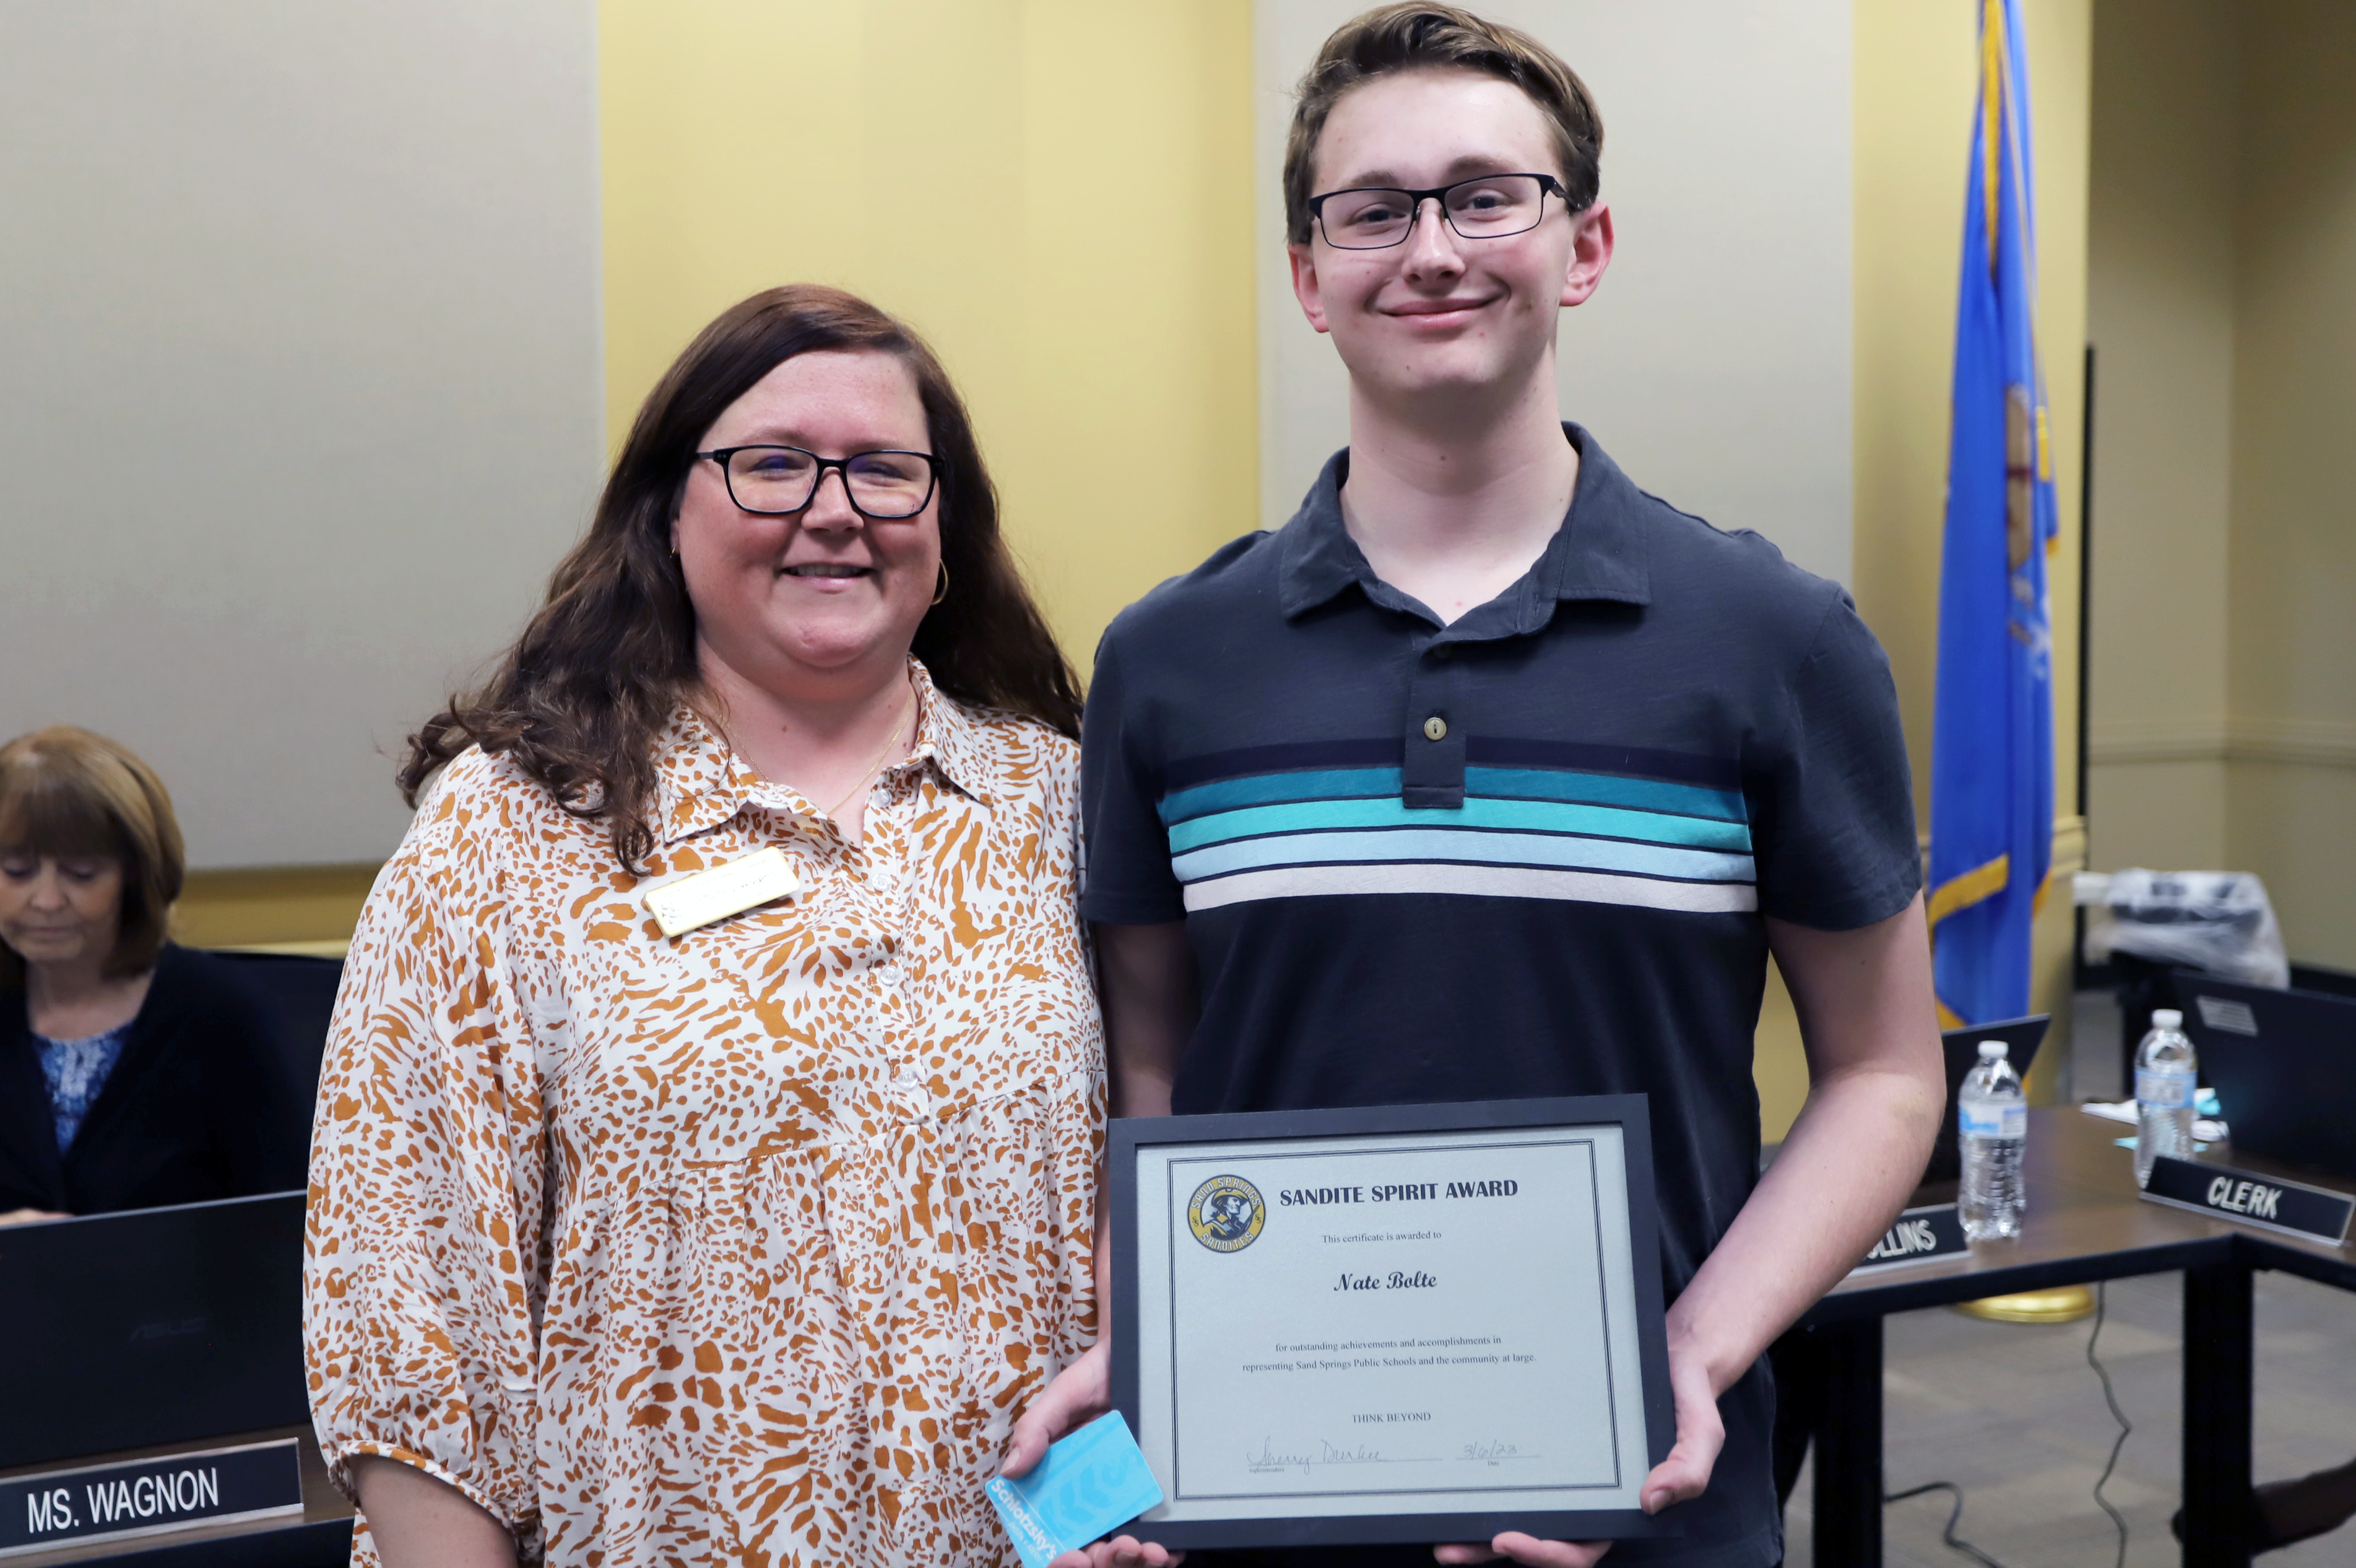 Nate Bolte Recognized at board meeting